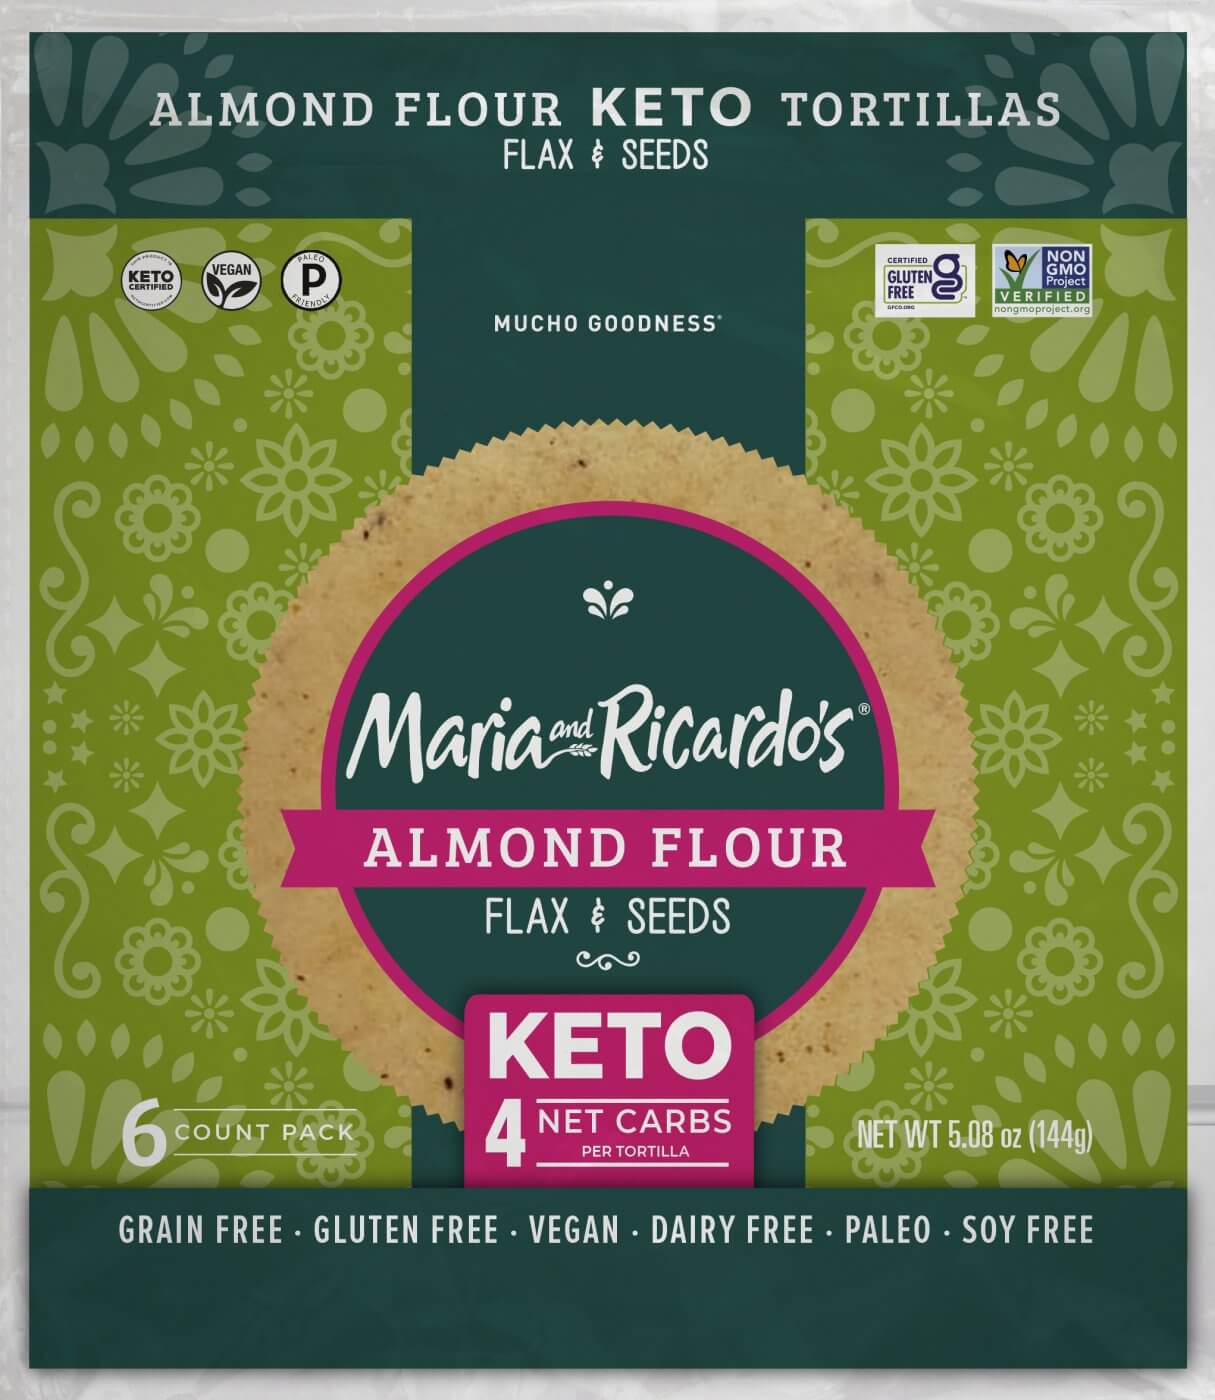 Maria and Ricardo's Flax & Seeds Almond Flour Tortillas 6 ct. LIL'S